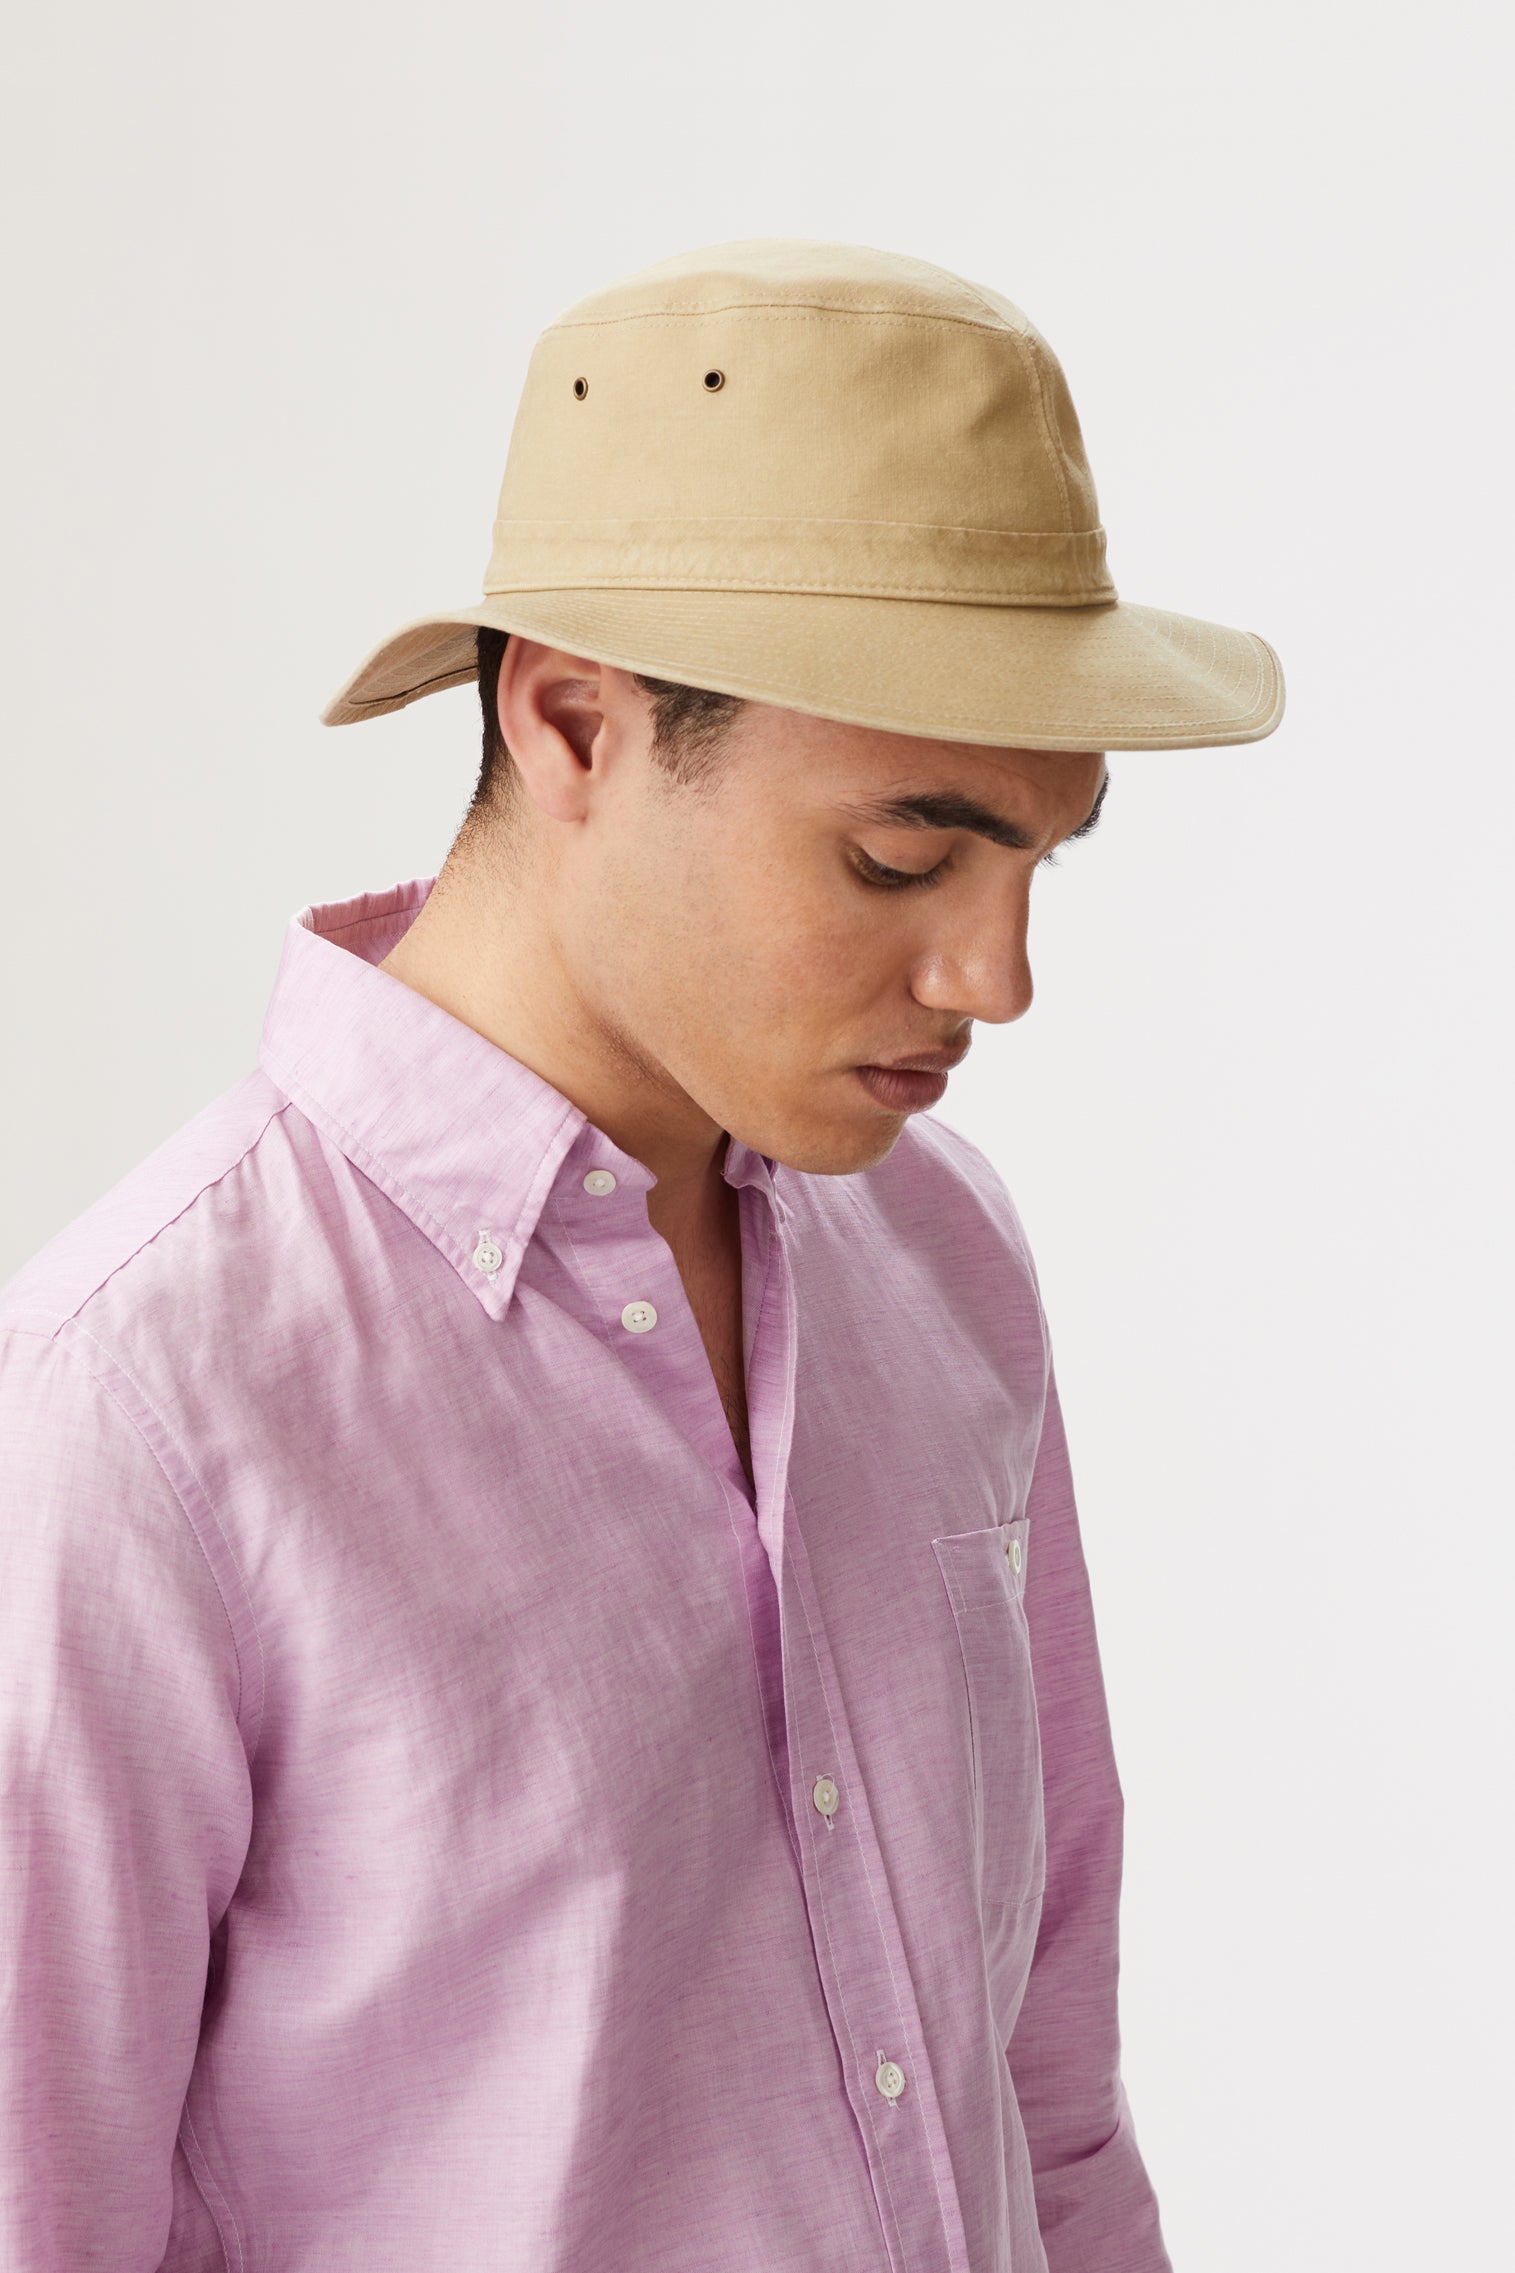 Capri Rollable Hat - Hats for Square Face Shapes - Lock & Co. Hatters London UK